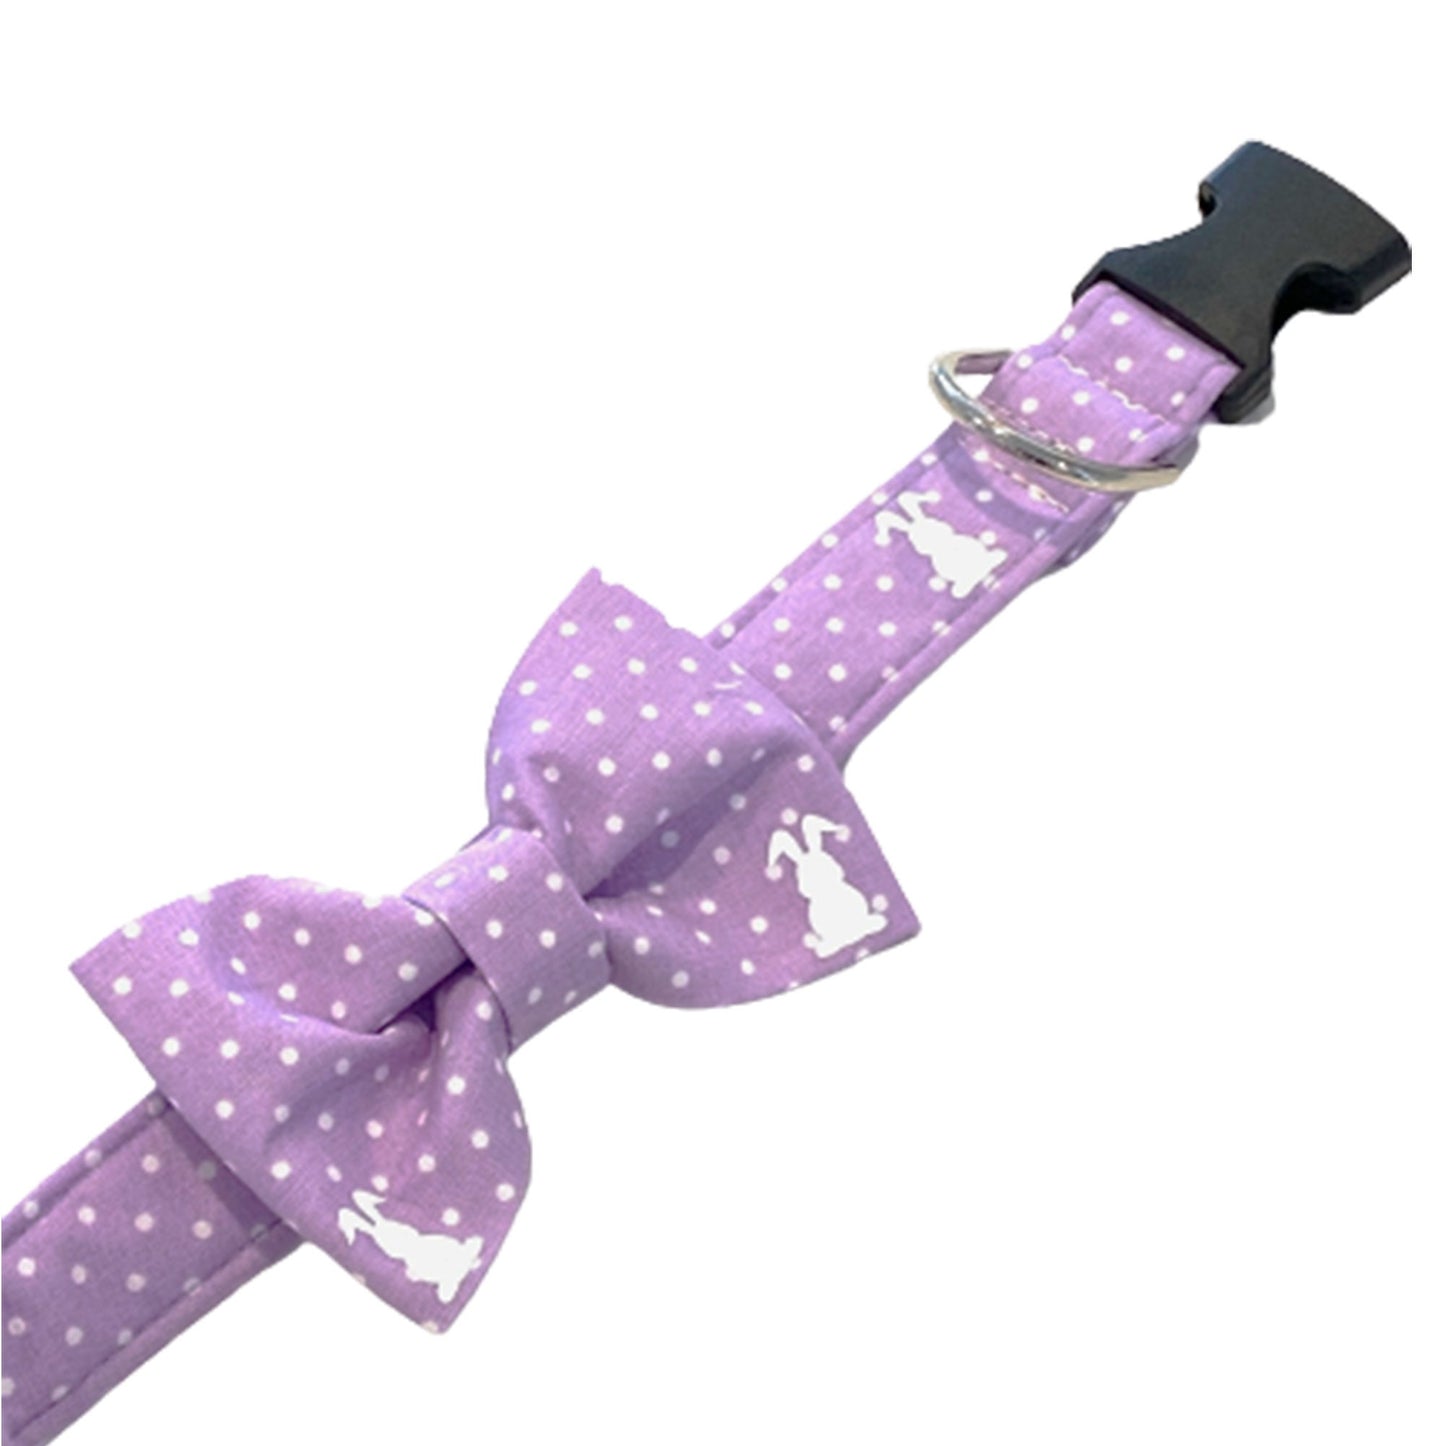 Easter Dog Collar with Bow Tie, Purple Dog Collar with Name, Bowtie Dog Collar Set - Purple Polka Dots